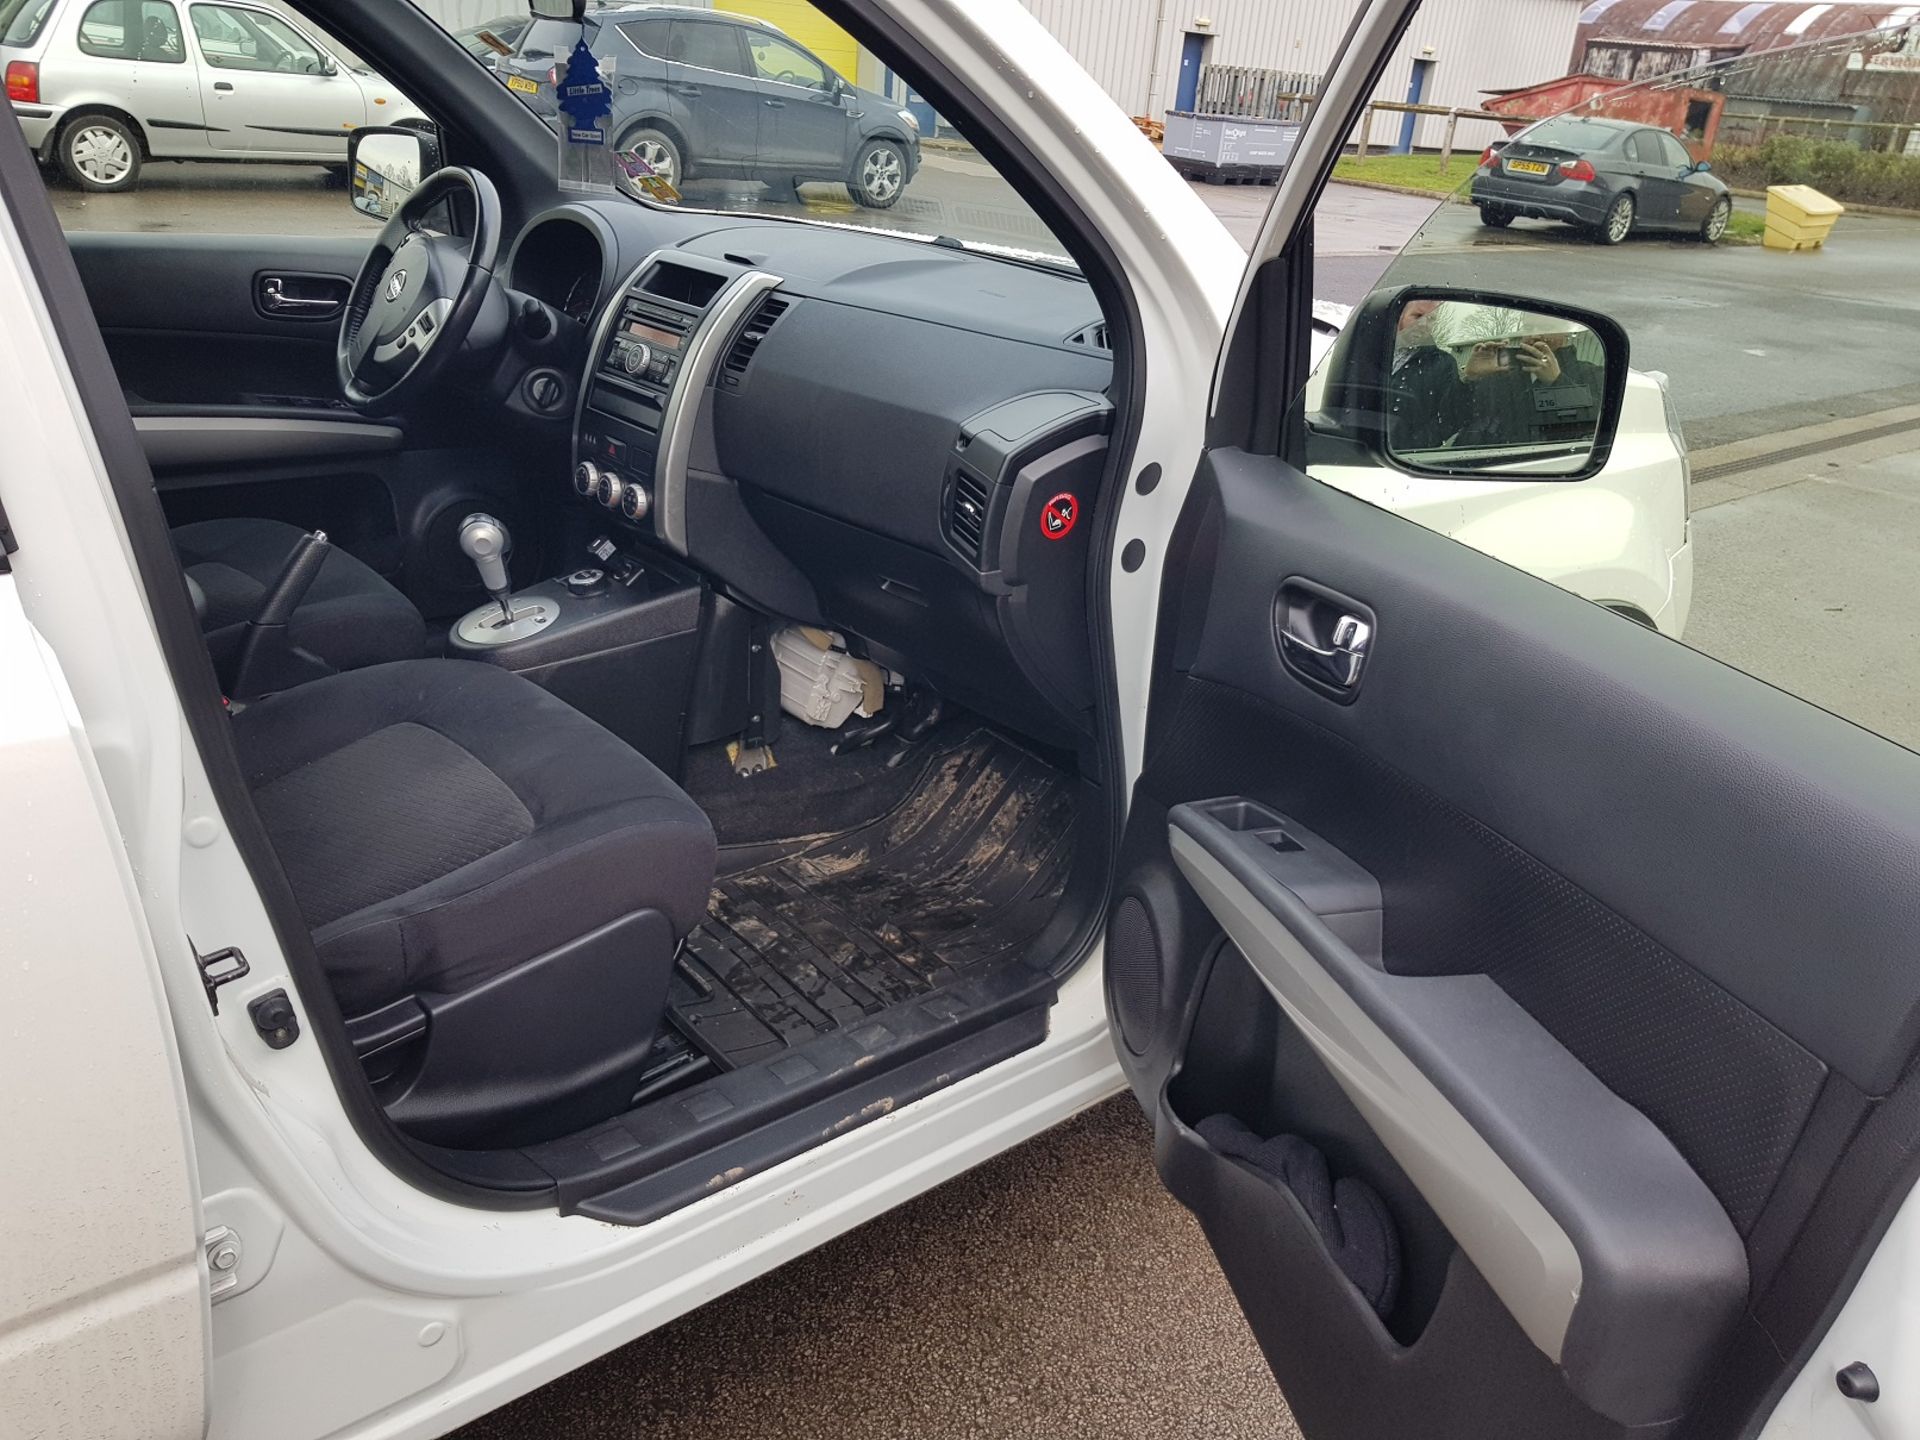 2012 NISSAN X-TRAIL 4X4 2.0 DIESEL AUTOMATIC, LEFT HAND DRIVE - REGISTERED IN SWITZERLAND *NO VAT* - Image 11 of 20